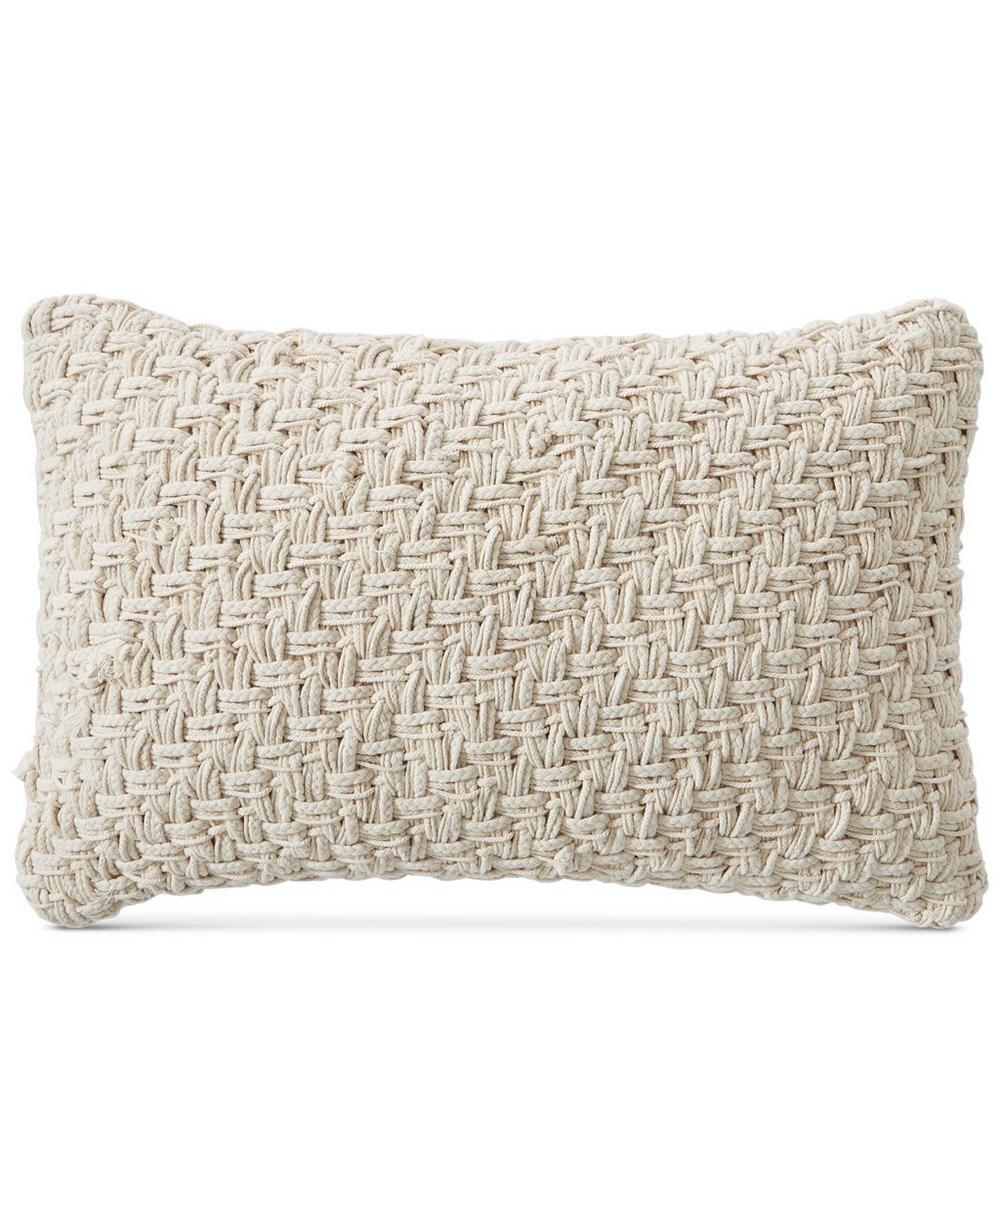 16X24 BASKET EMBROIDERED DECORATIVE PILLOW, image 1